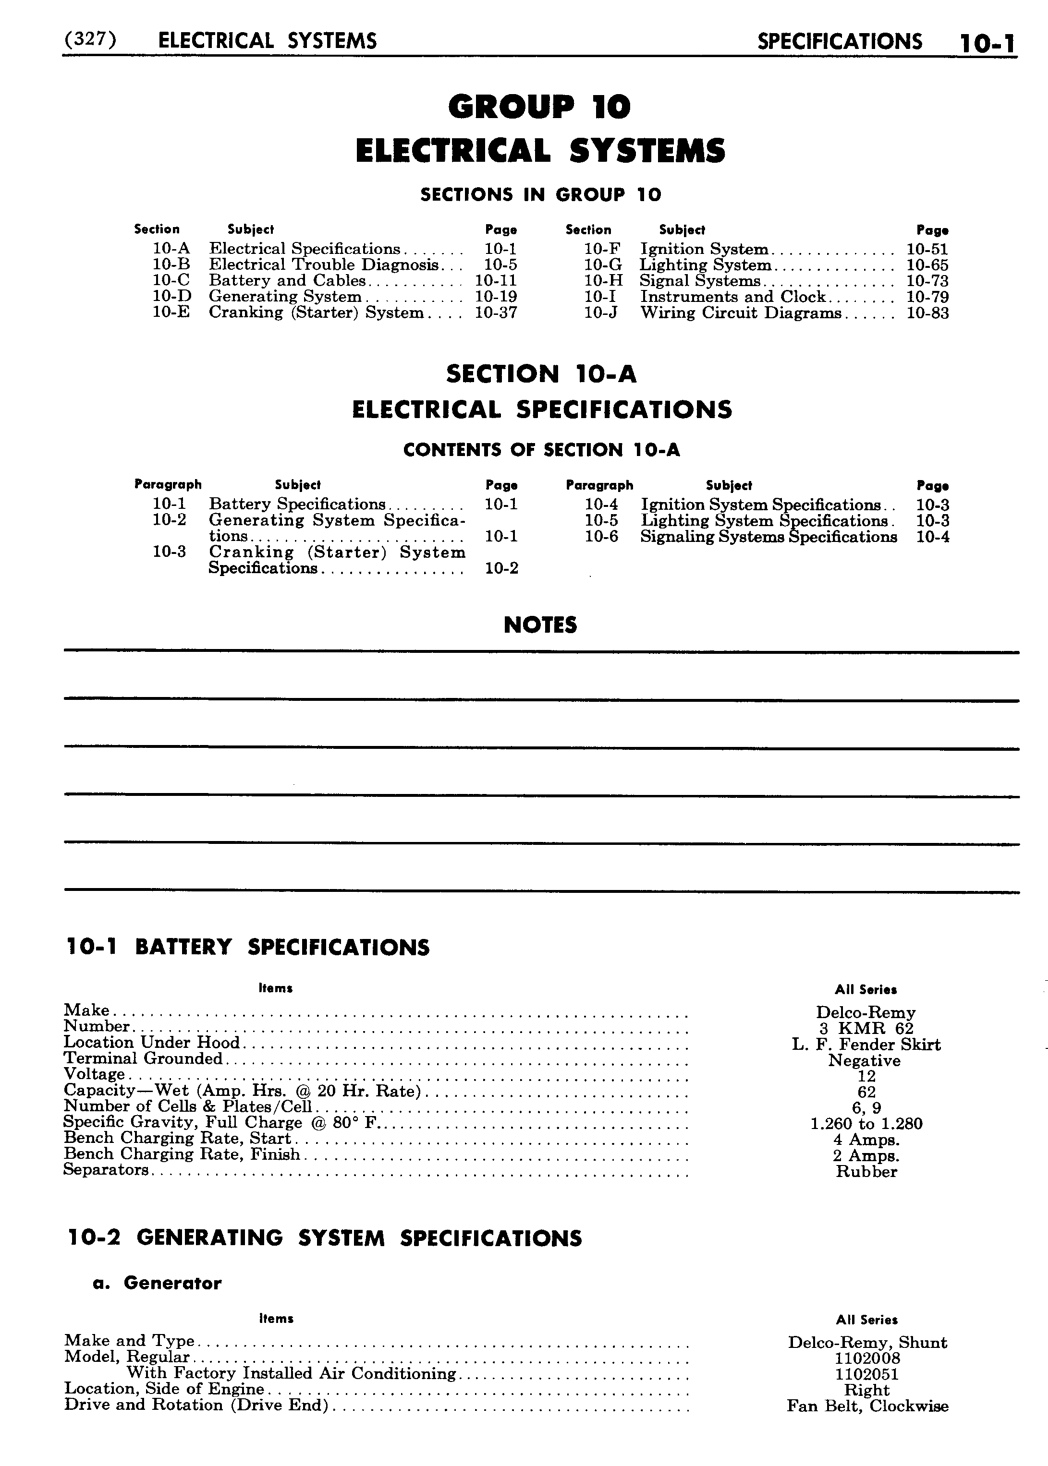 n_11 1956 Buick Shop Manual - Electrical Systems-001-001.jpg